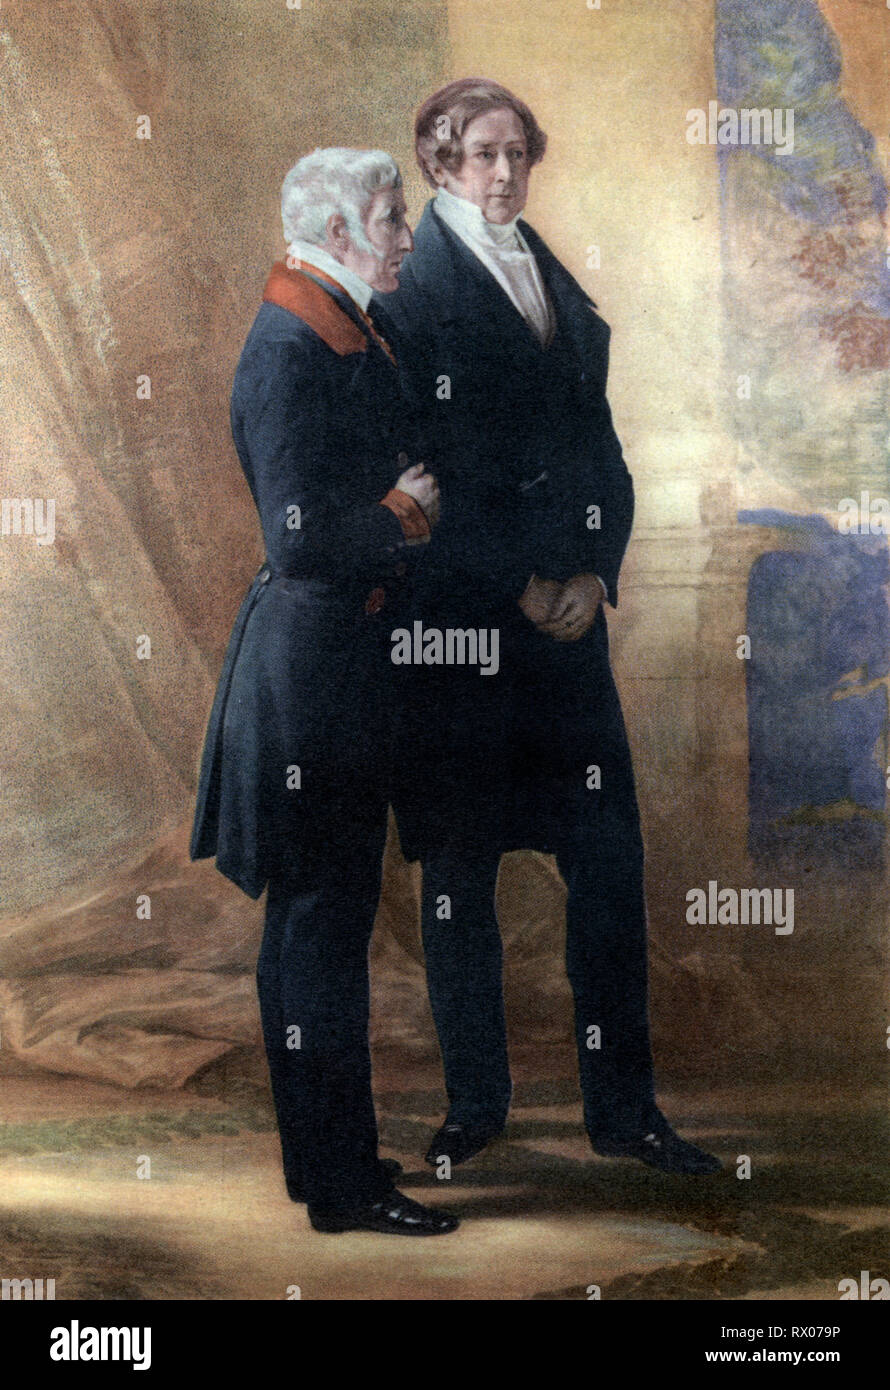 The Duke of Wellington and Sir Robert Peel, 1851. After Franz Xaver Winterhalter (1805-1873). The Conservative government of the United Kingdom of Great Britain and Ireland that began in 1828 and ended in 1830 was led by the Duke of Wellington in the House of Lords and Robert Peel in the House of Commons. Stock Photo